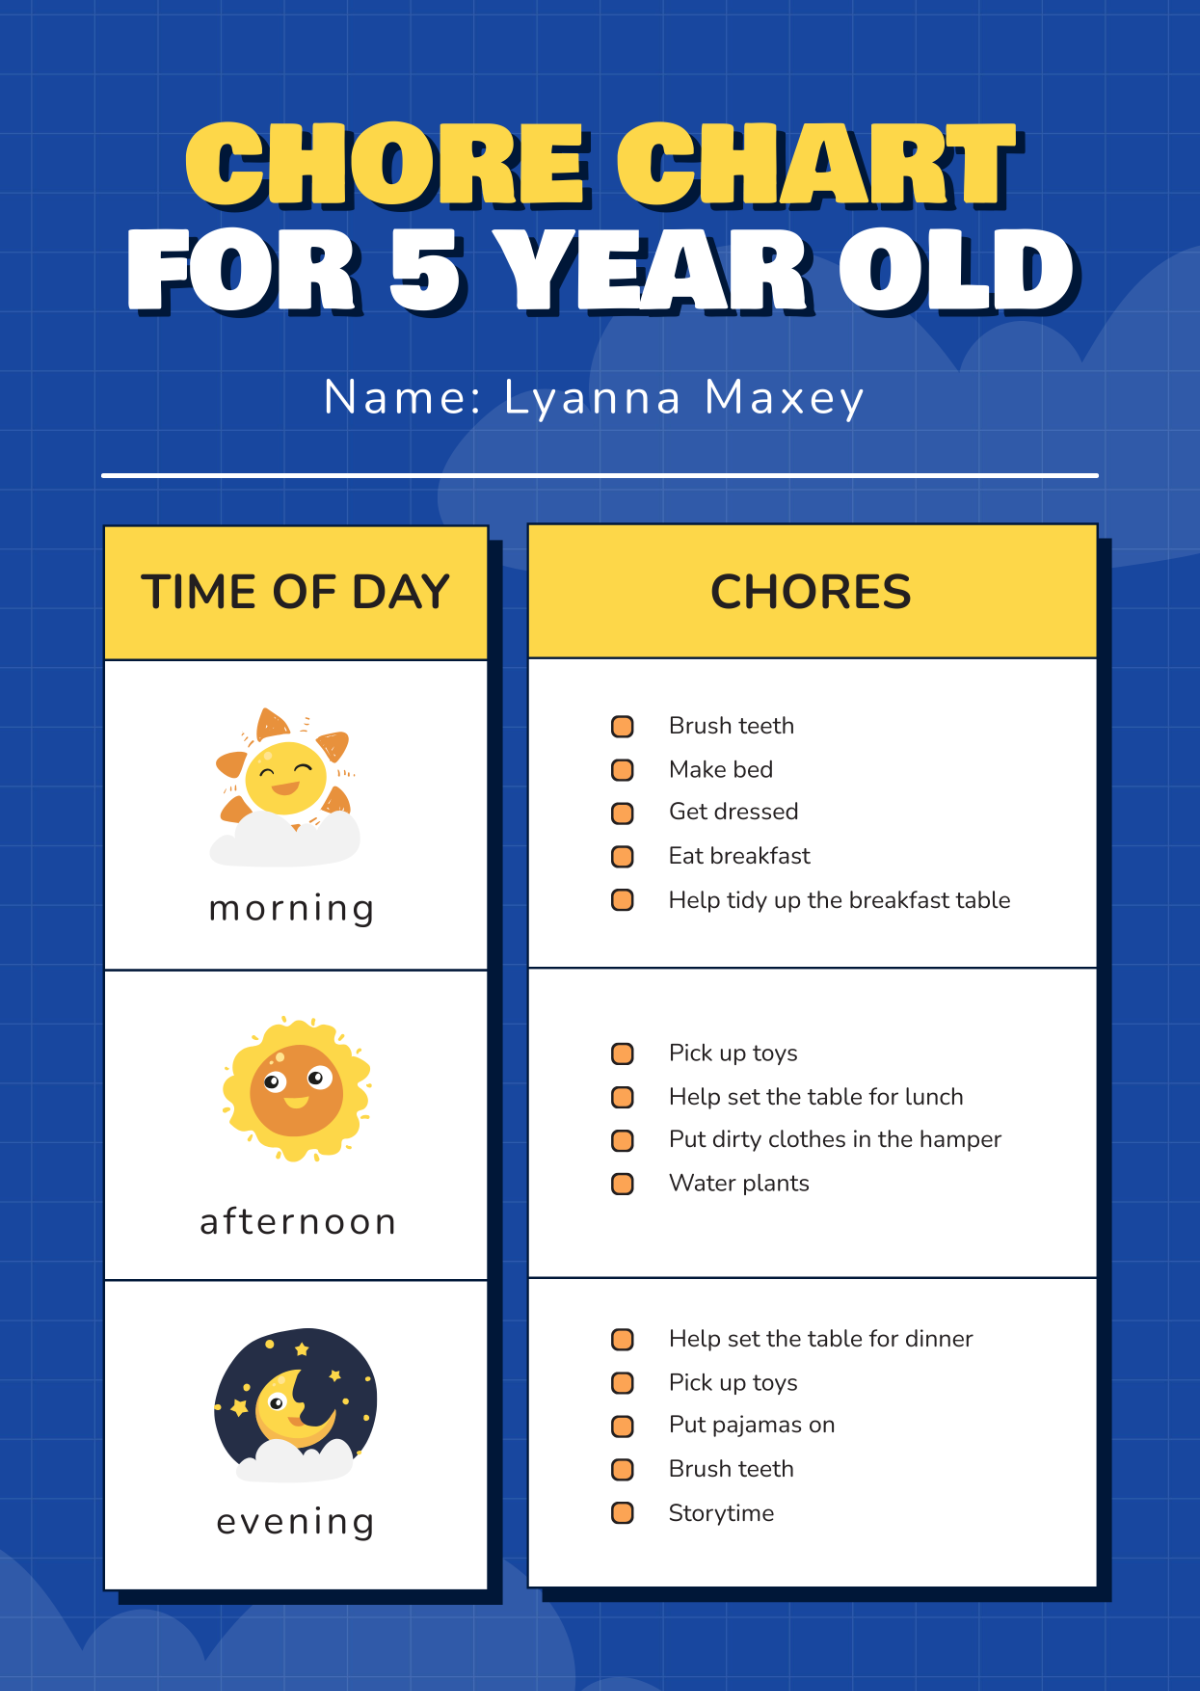 Chore Chart For 5 Year Old